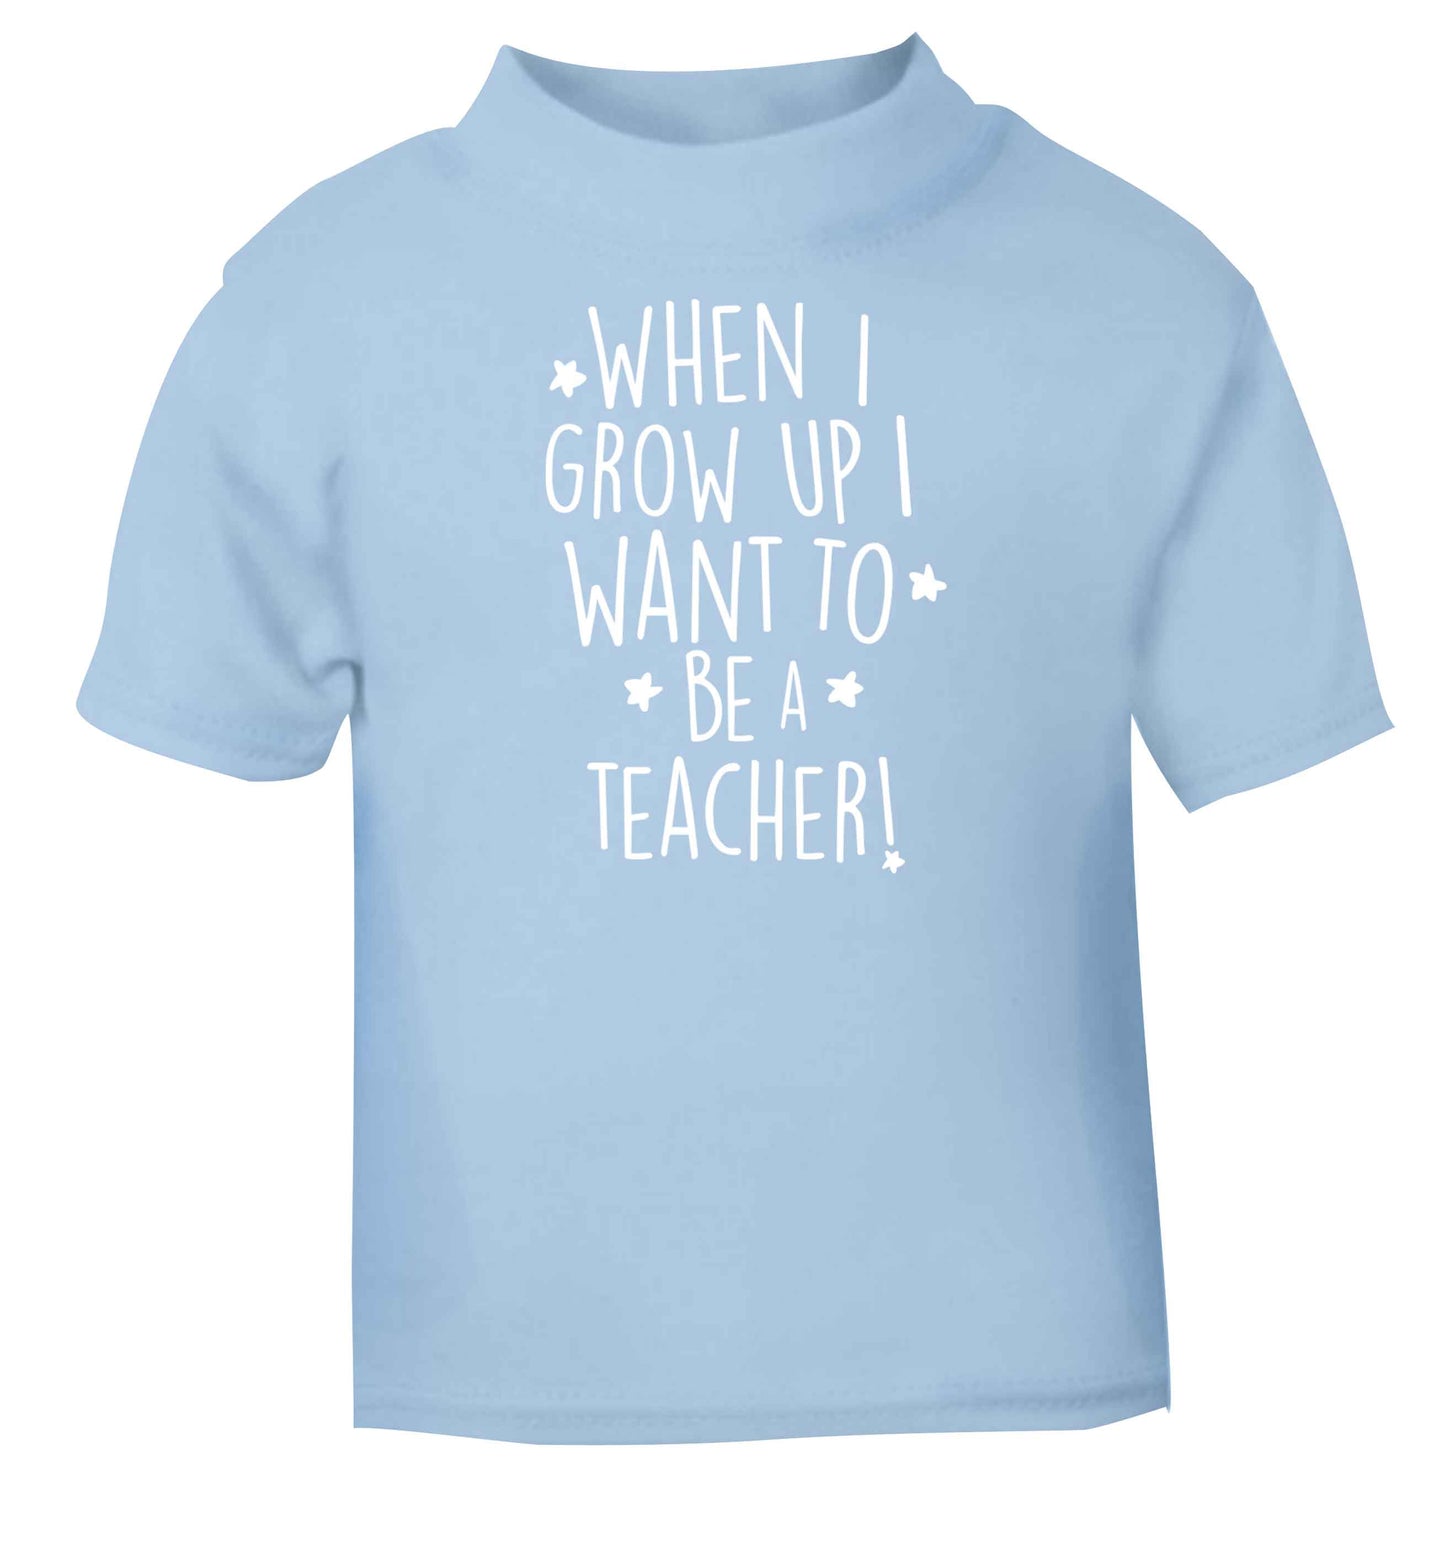 When I grow up I want to be a teacher light blue baby toddler Tshirt 2 Years